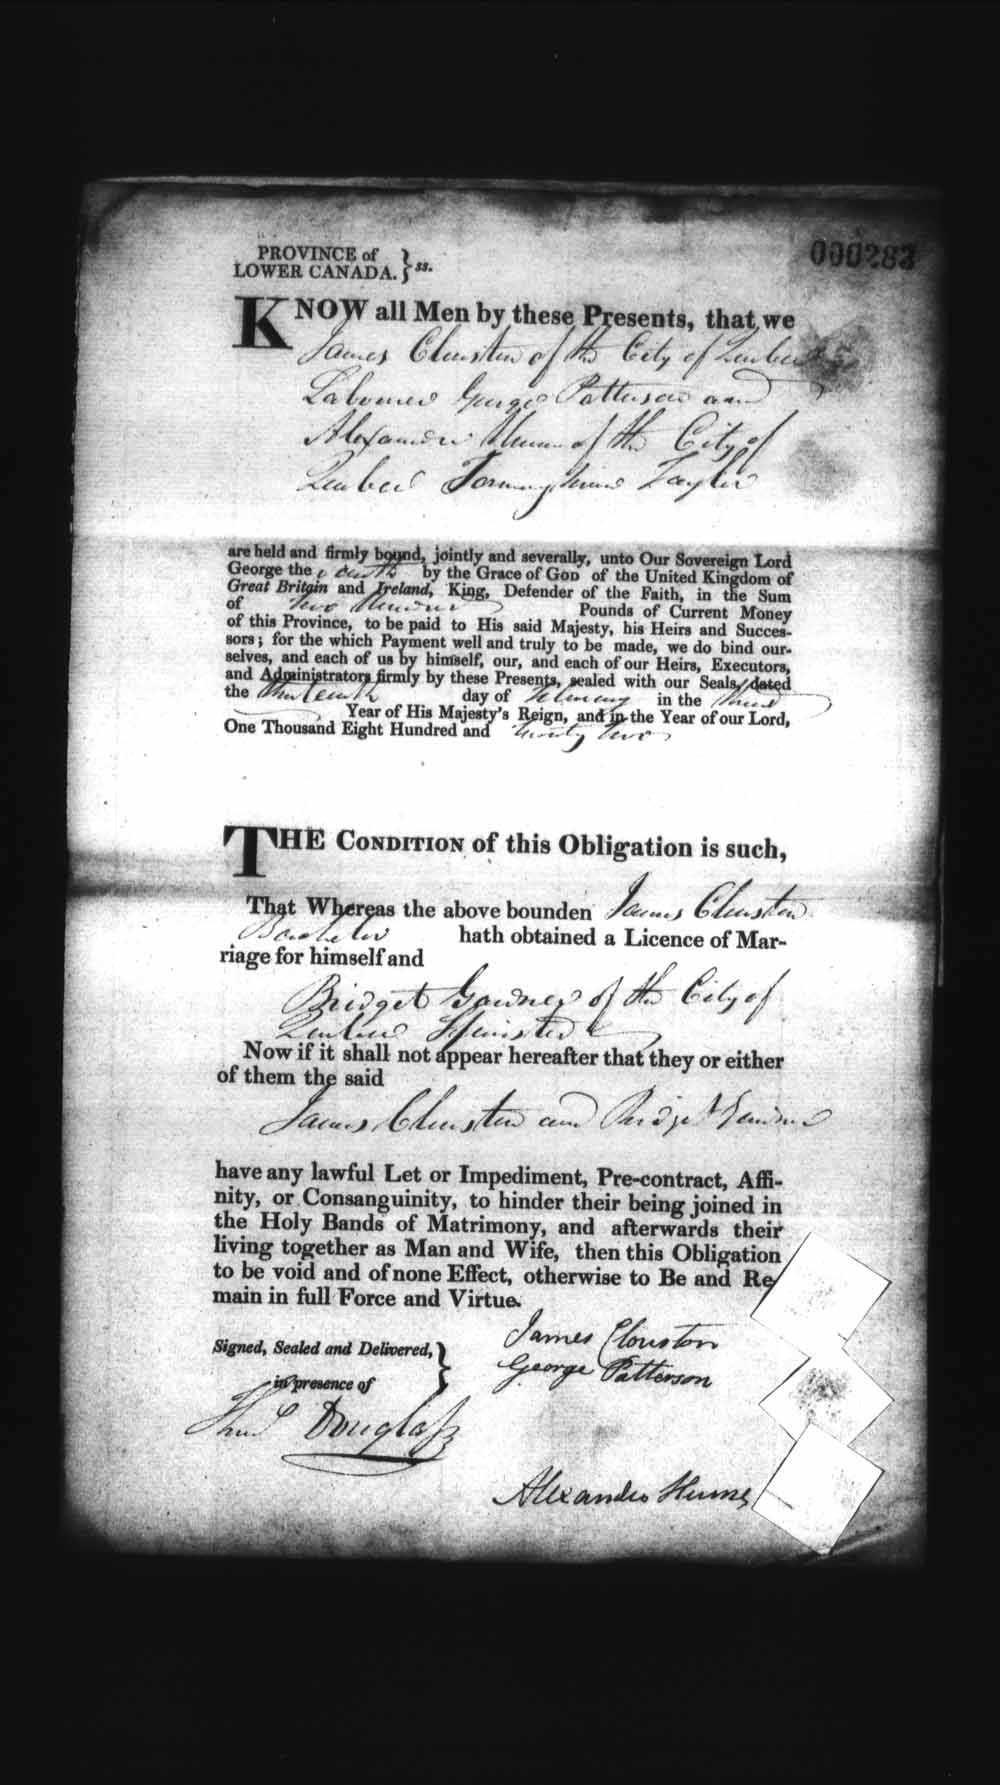 Digitized page of Upper and Lower Canada Marriage Bonds (1779-1865) for Image No.: e008236152